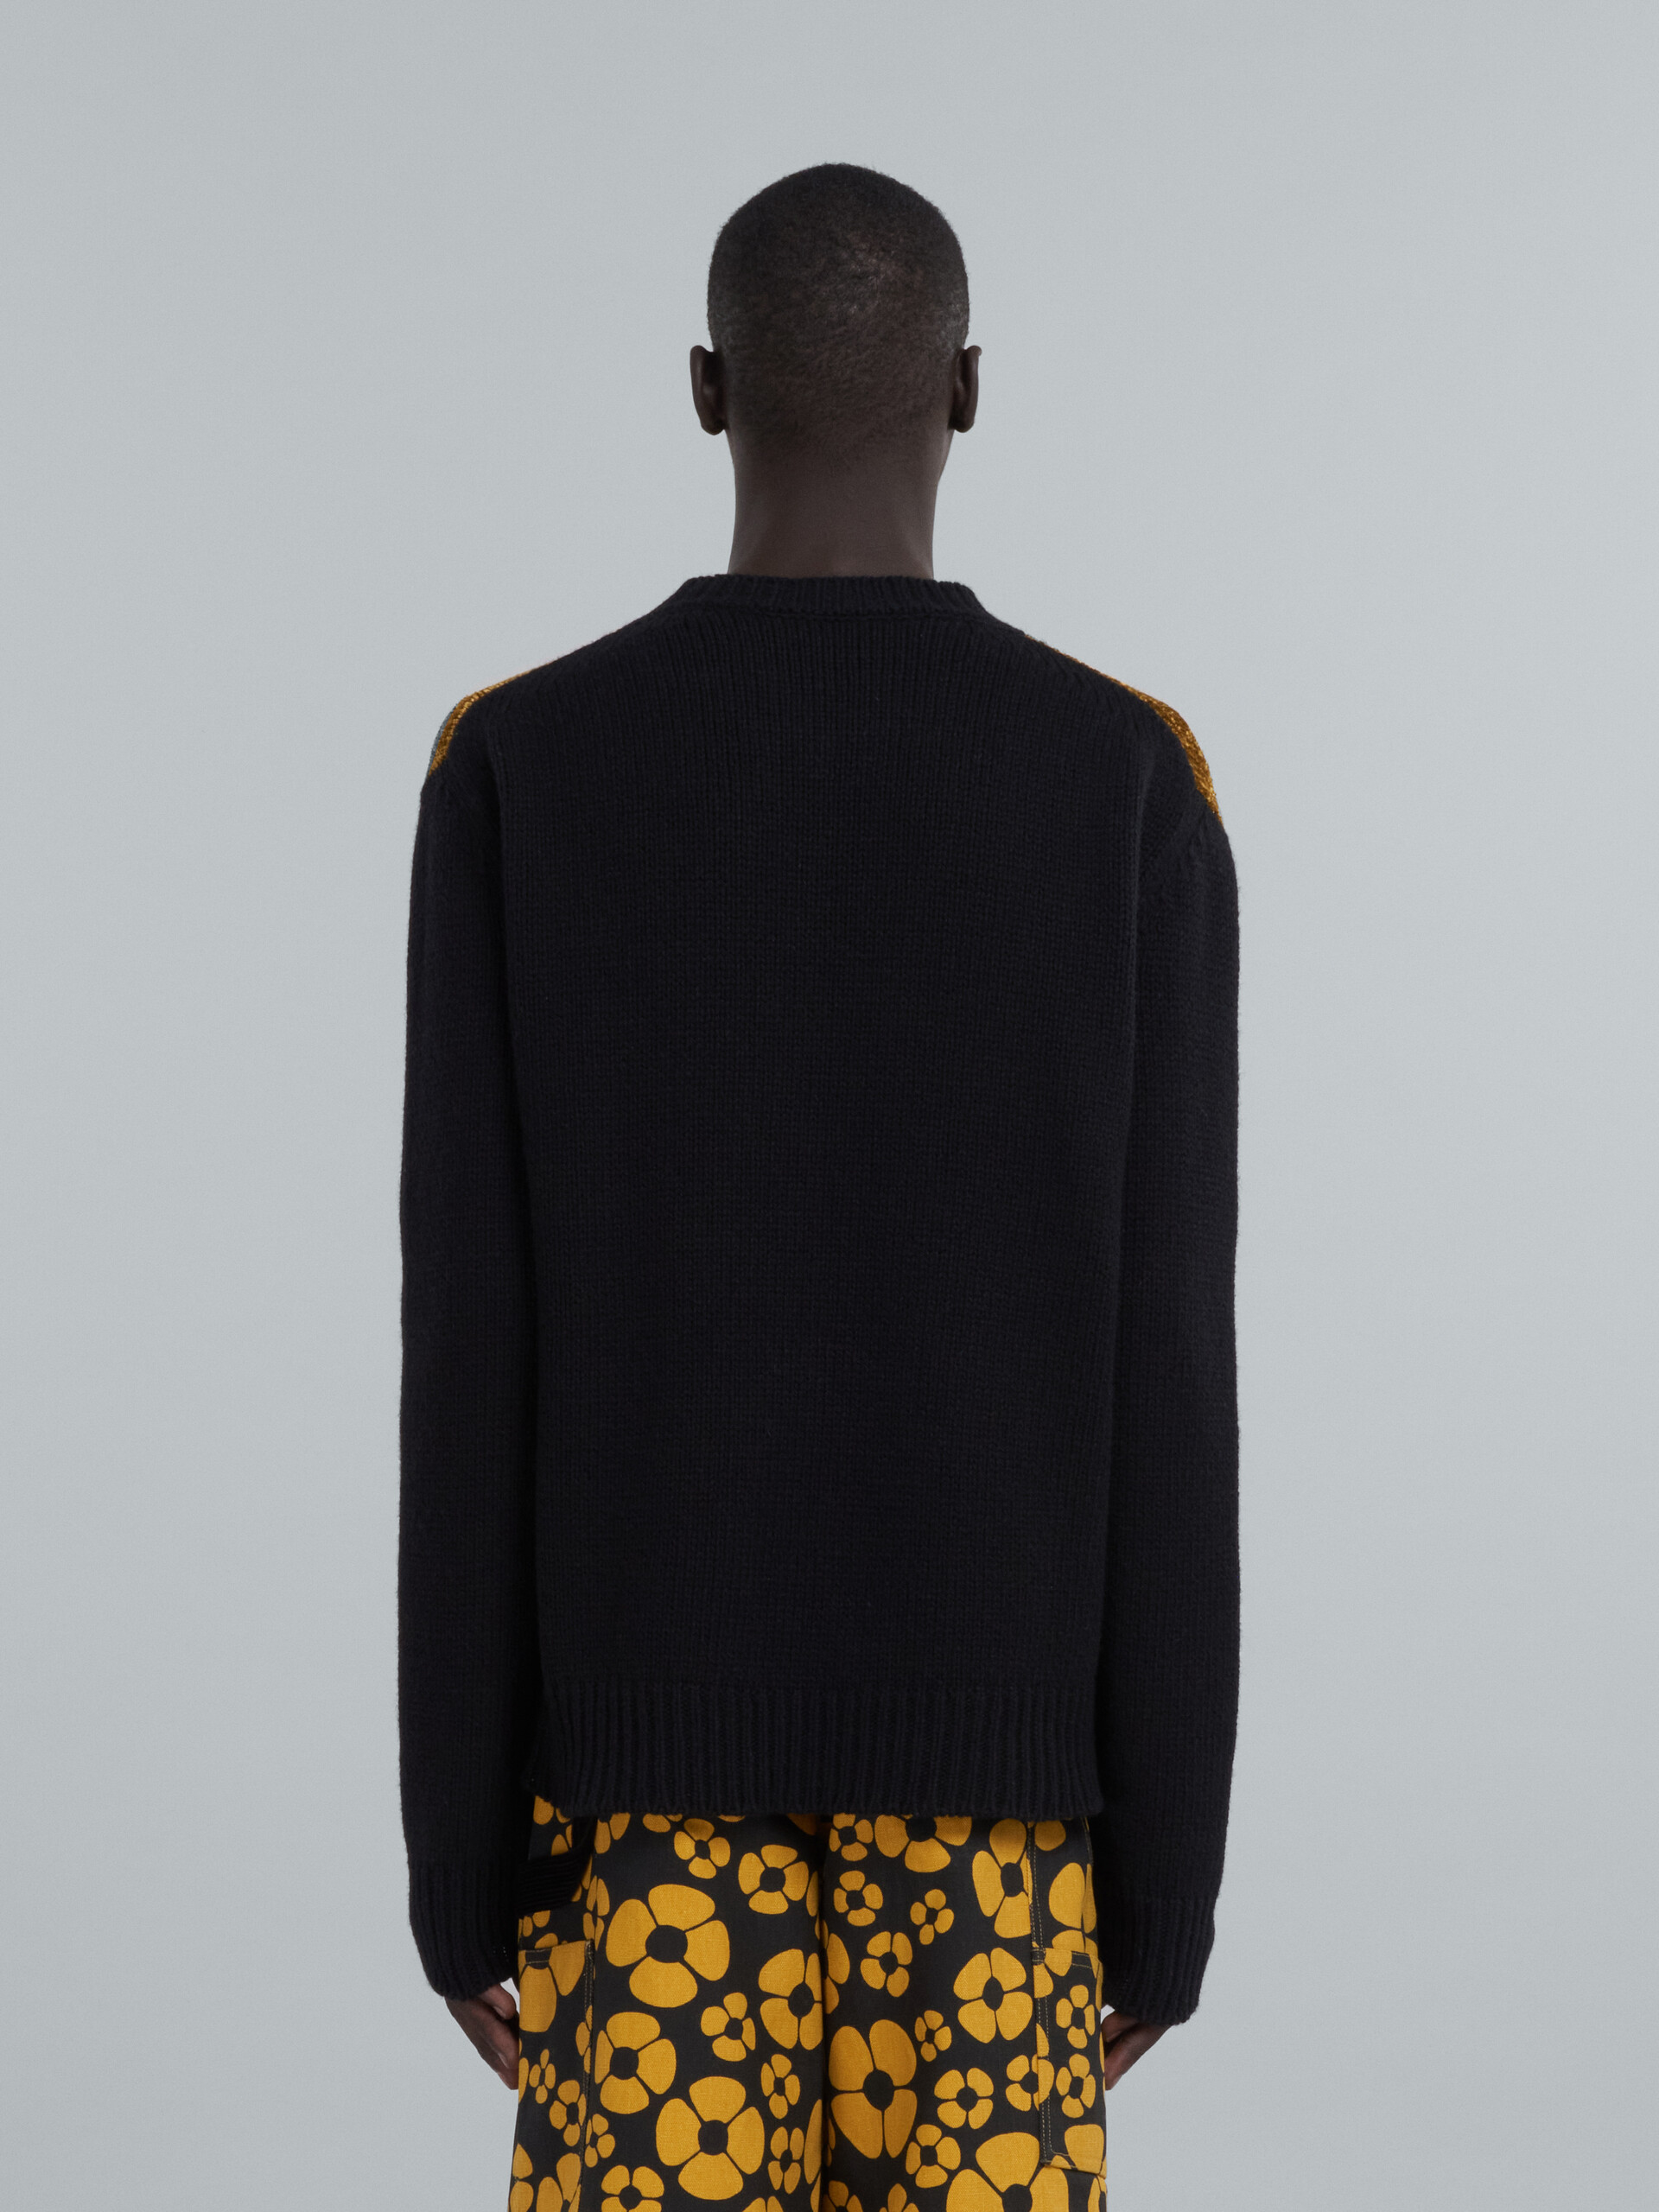 MARNI x CARHARTT WIP - Crewneck sweater in black wool and chenille with logo - Pullovers - Image 3